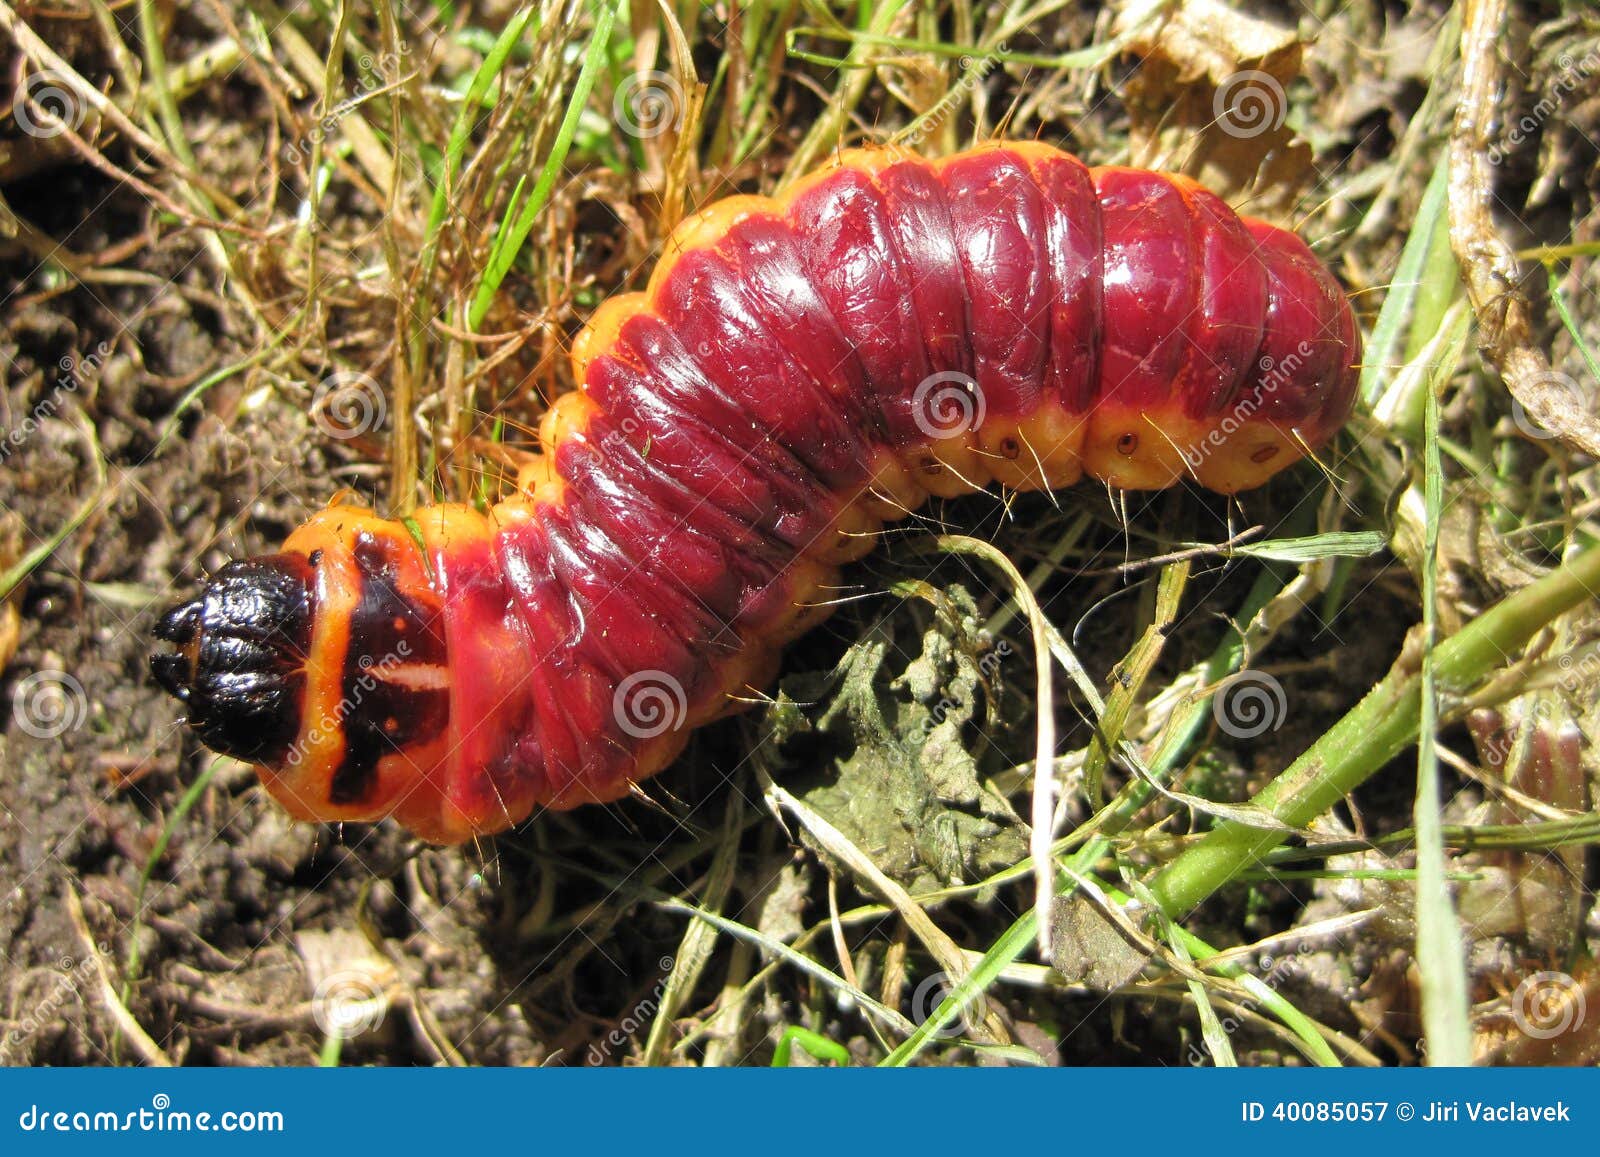 Big red grub as fishfood stock image. Image of meal, creature - 40085057